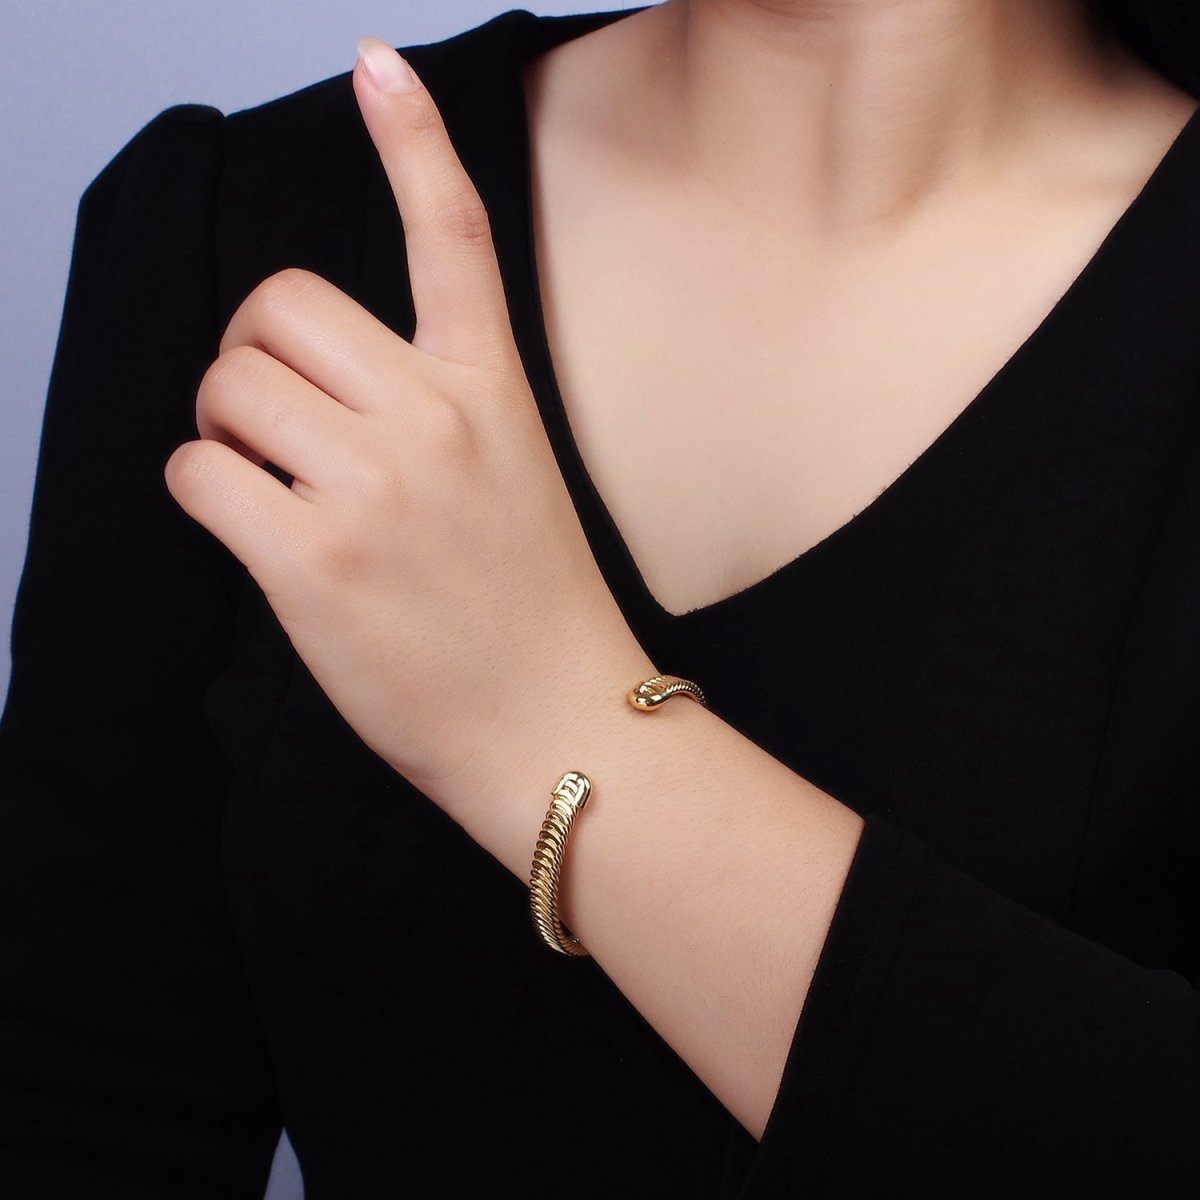 24K Gold Filled Snake Pattern Textured Cuff Bangle Bracelet in Silver & Gold | WA-1914 WA-1915 Clearance Pricing - DLUXCA